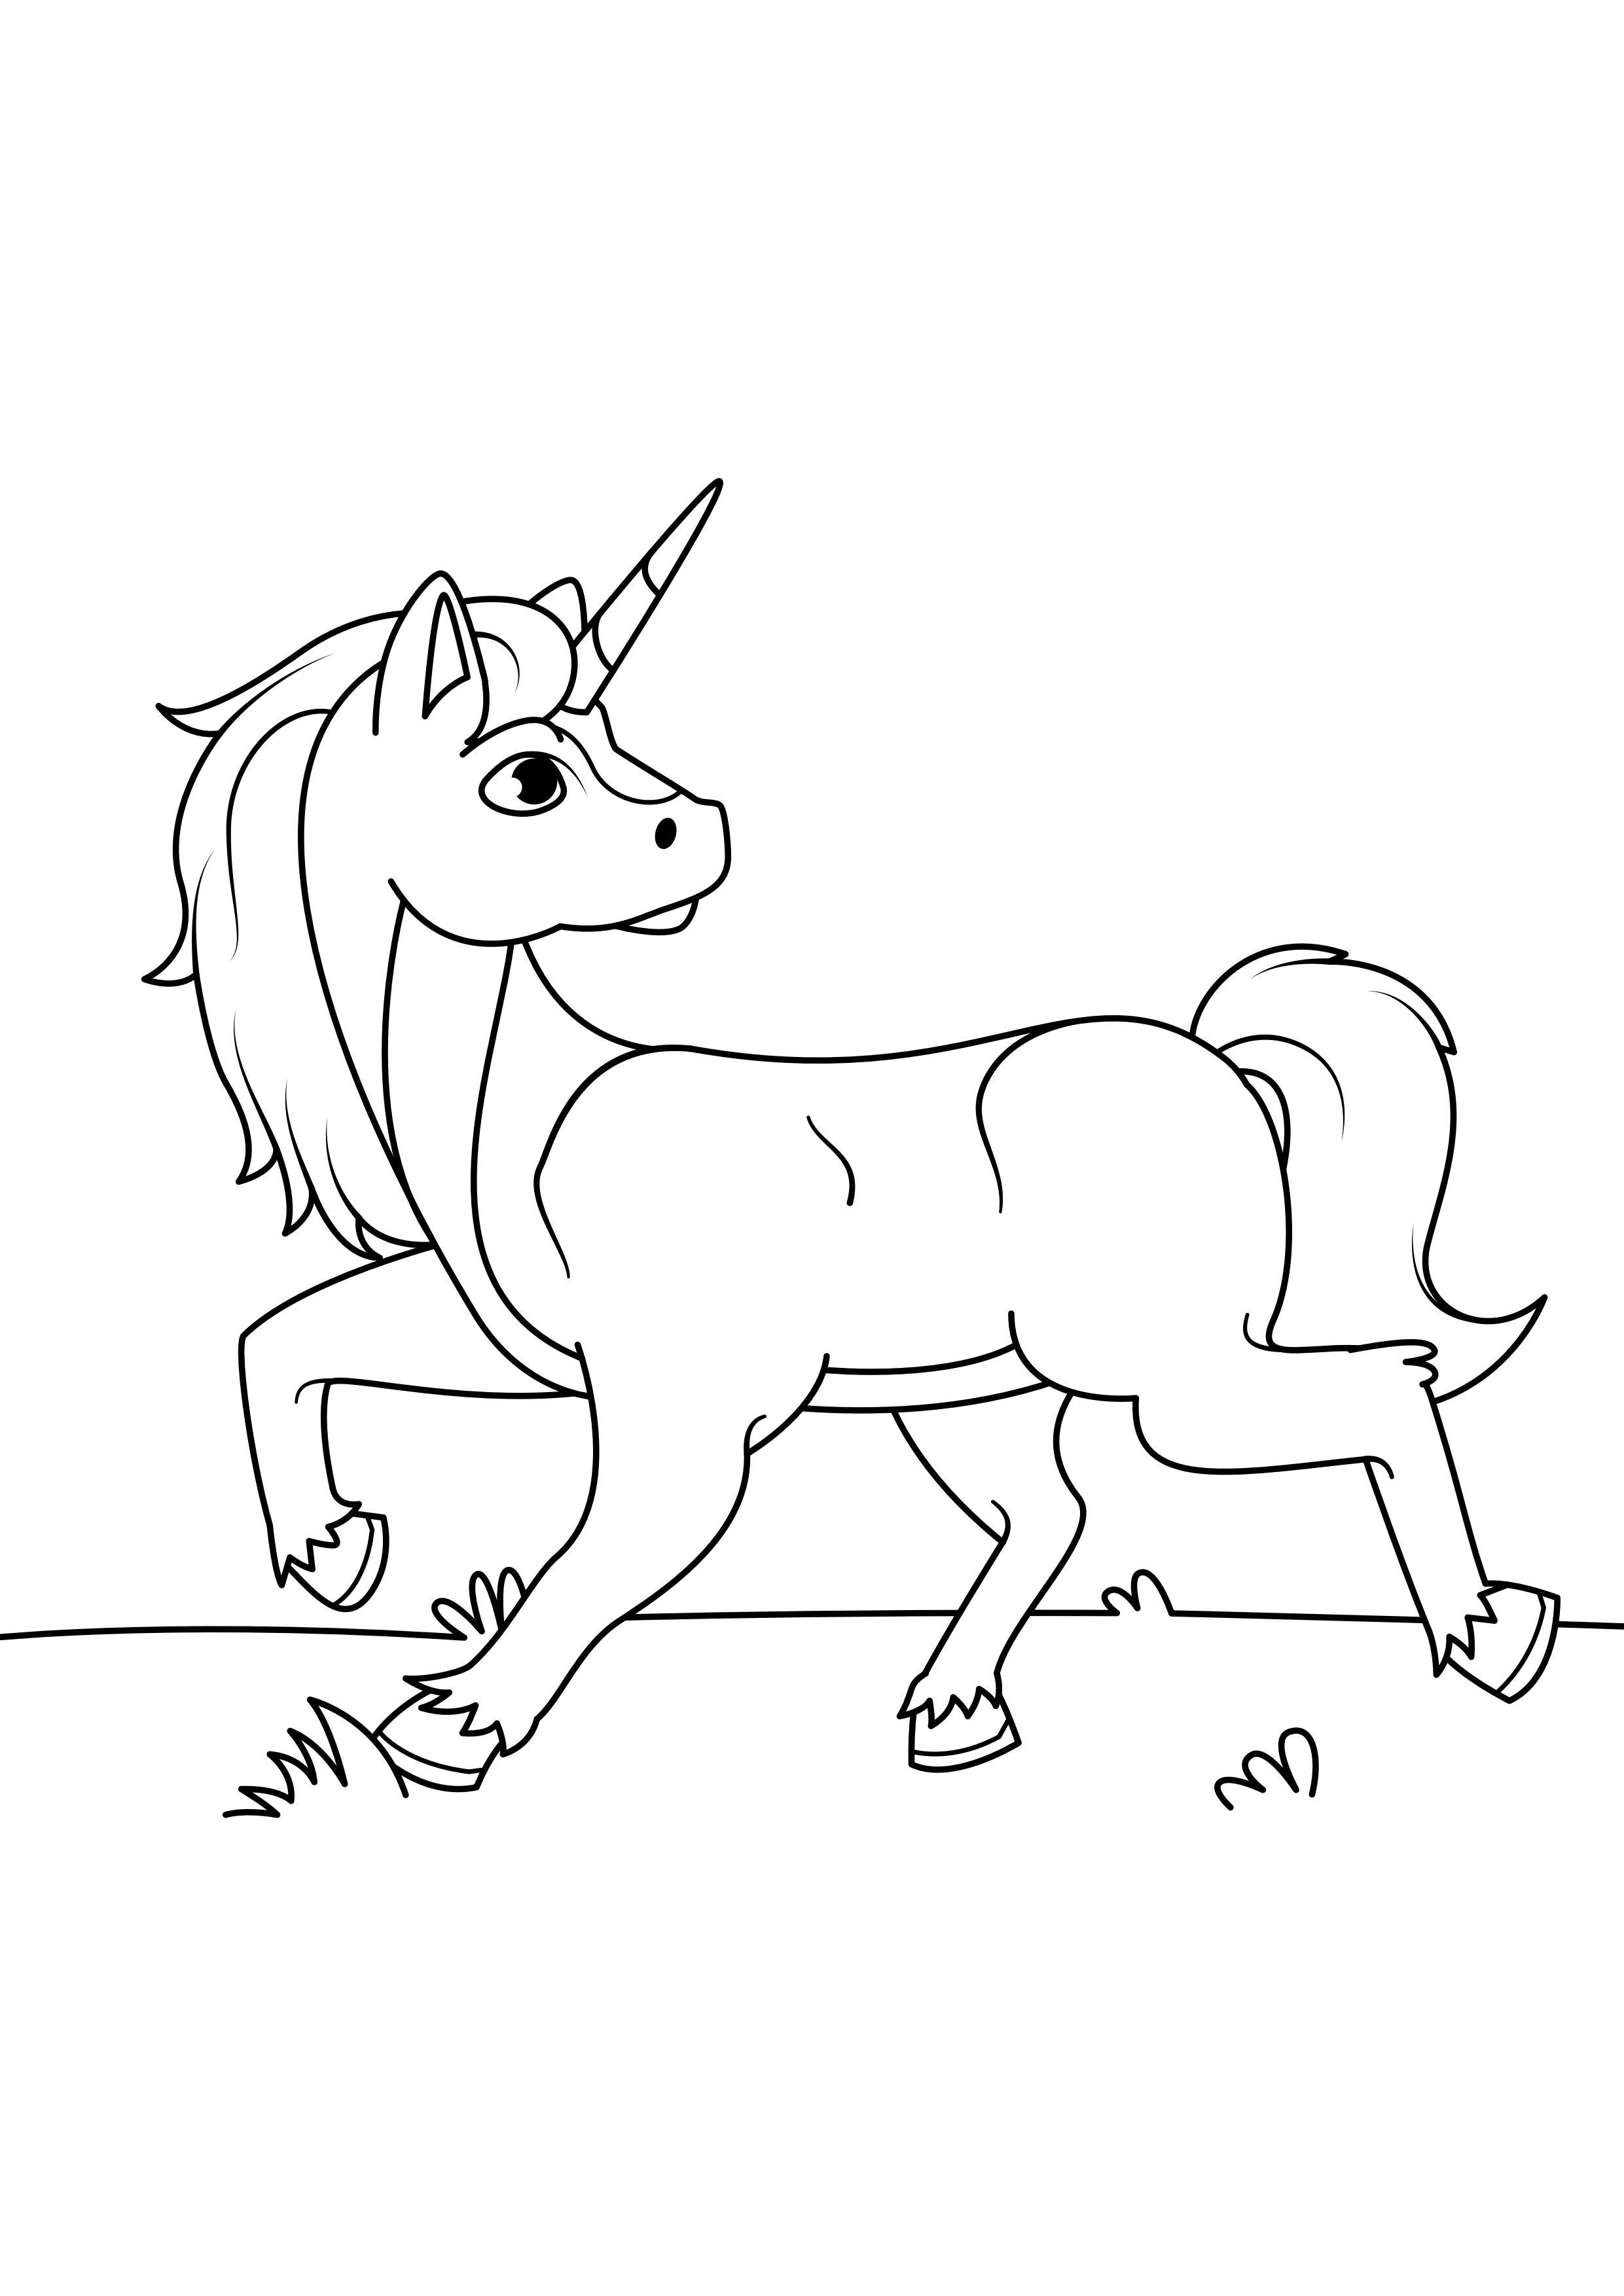 Coloring page unicorn